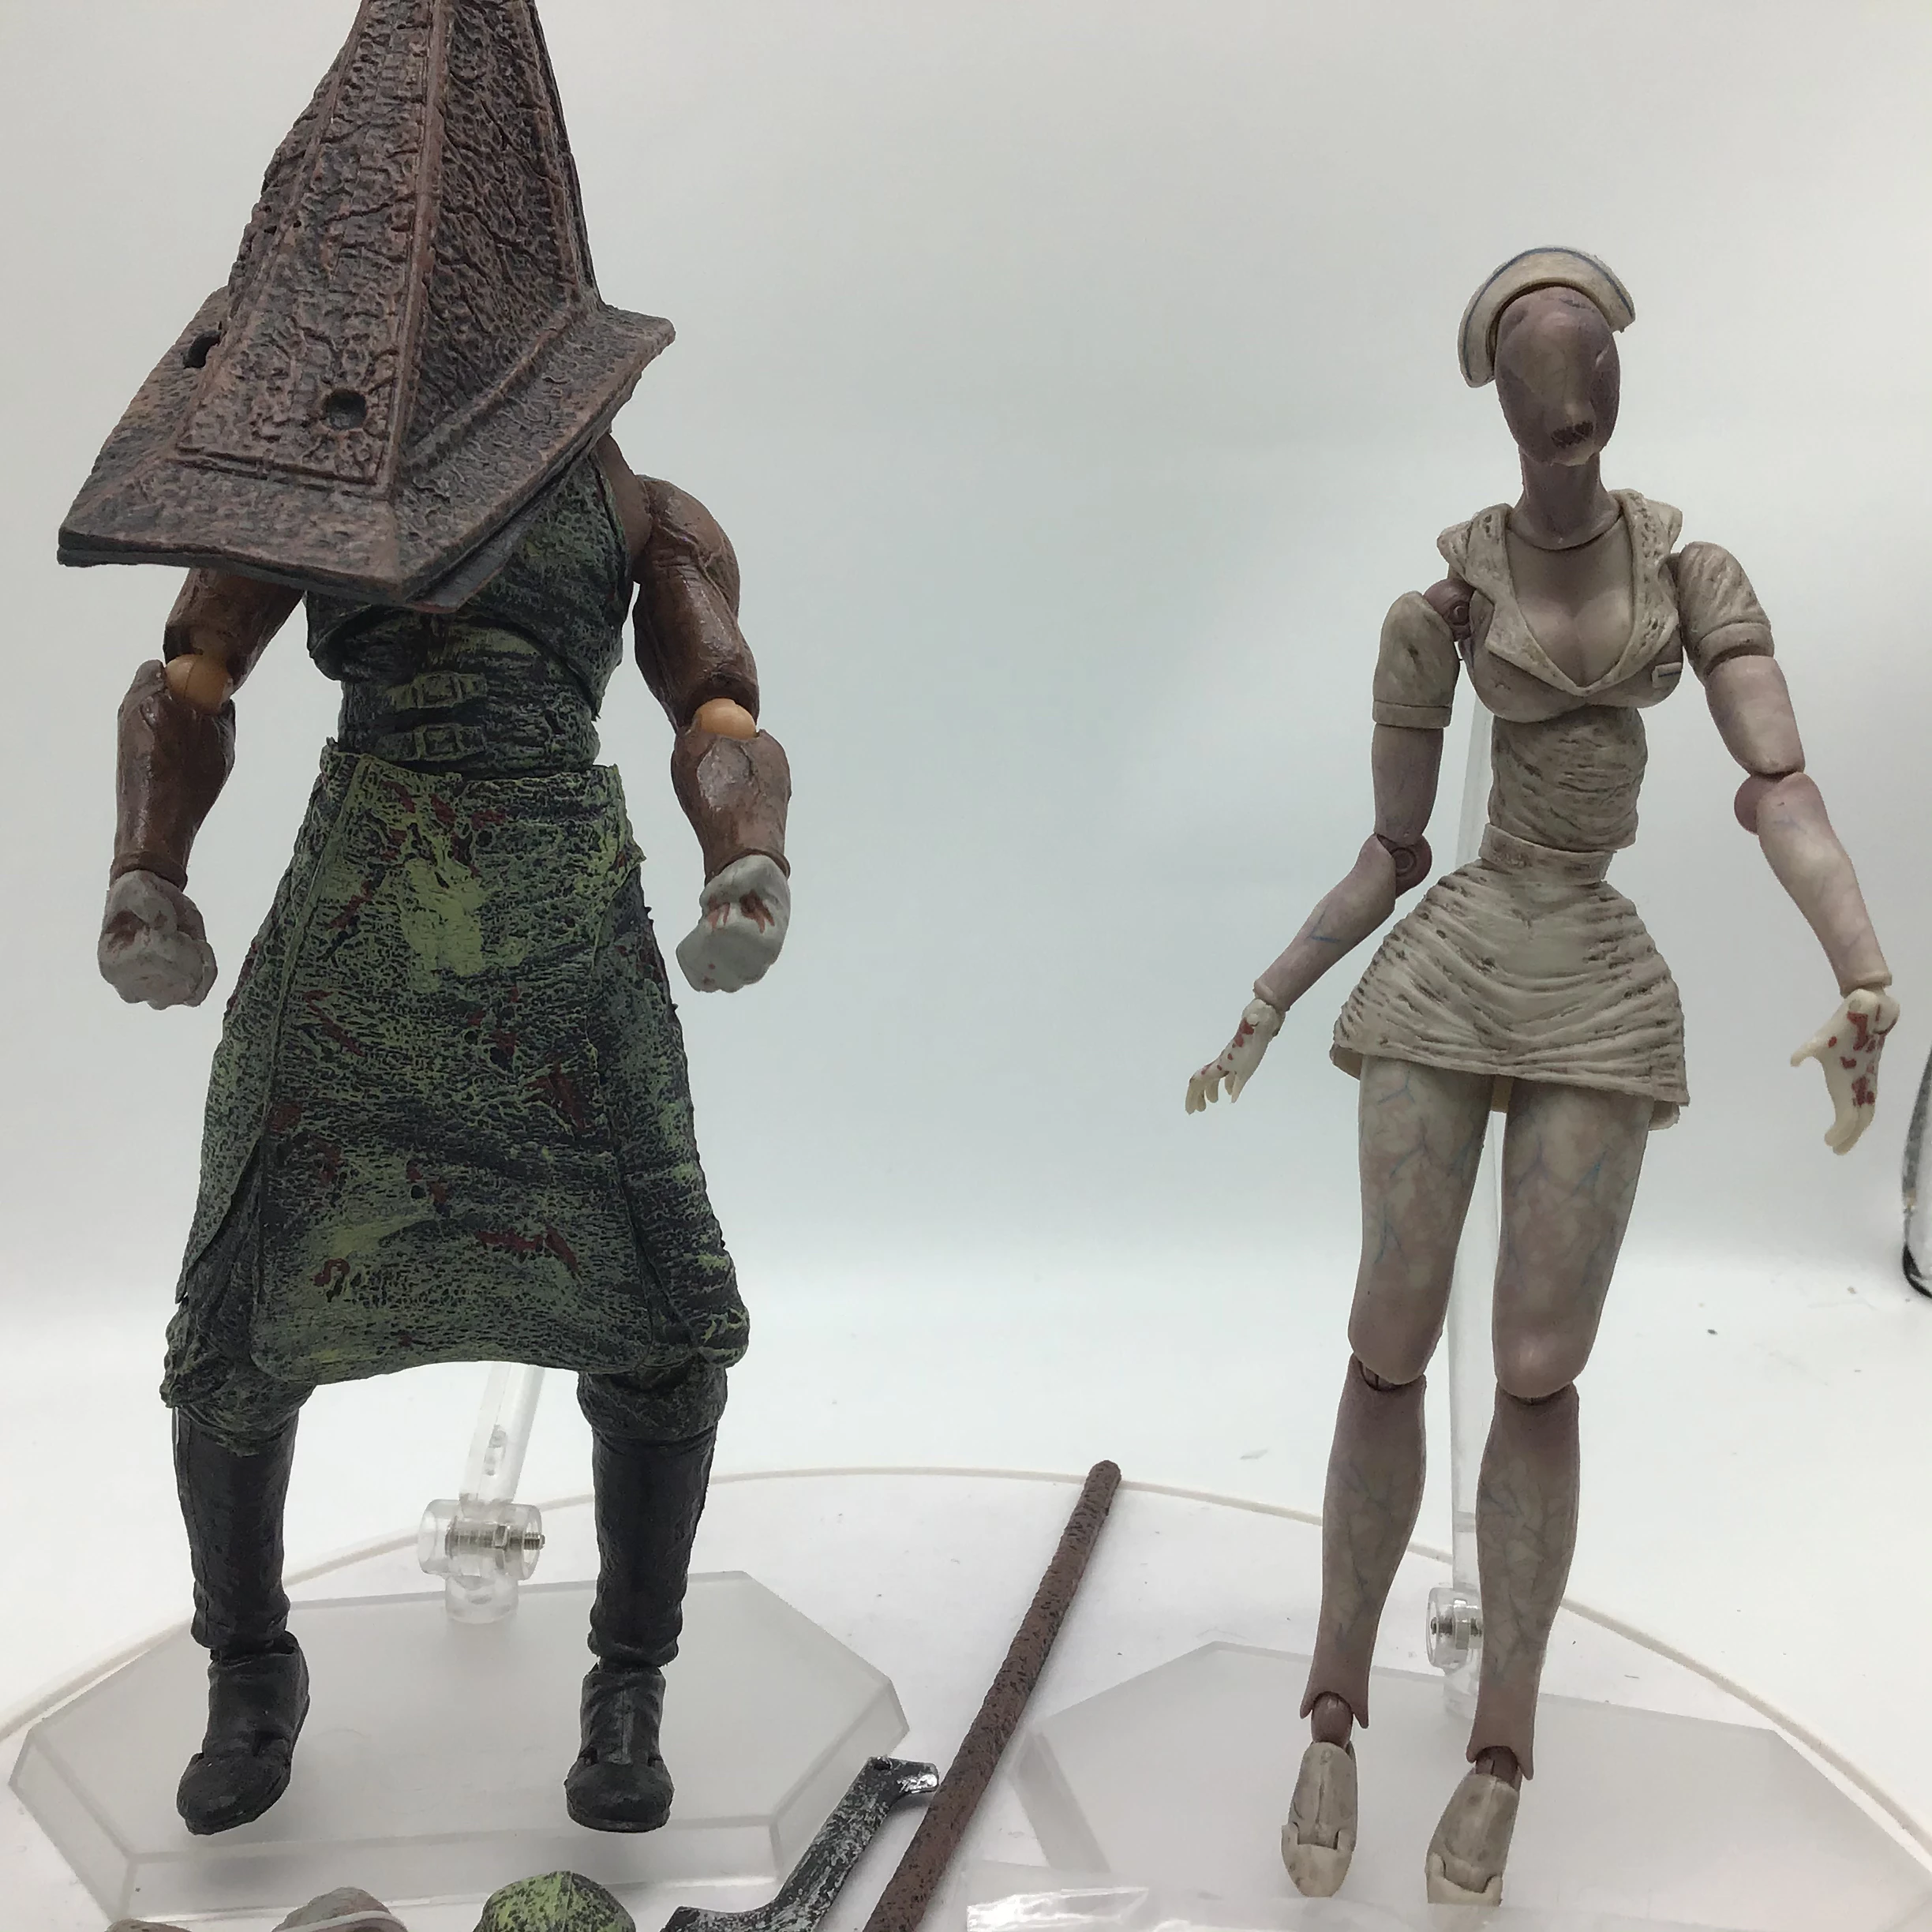 Silent Hill 2 Revelation Figma SP055 Red Pyramid Head Thing Action Figure  SP-061 Bubble Head Nurse Horror Movie Model Dolls Gift - AliExpress